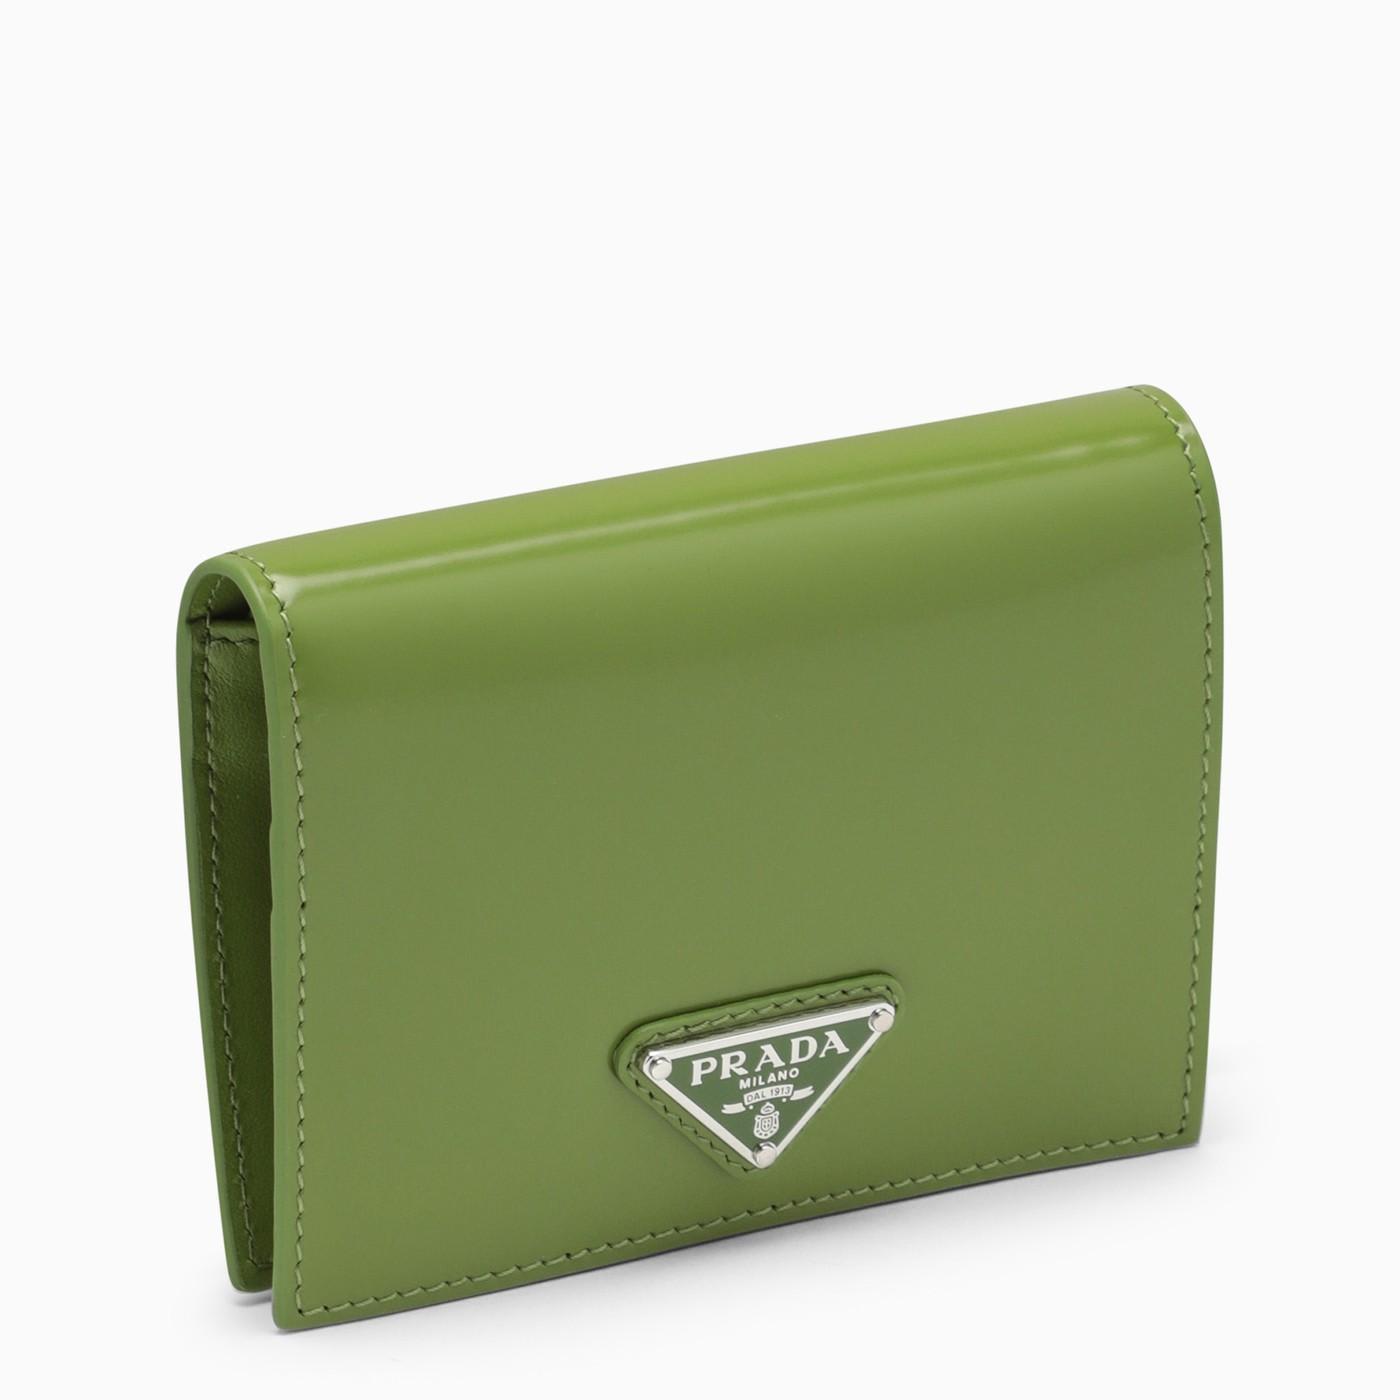 Green saffiano leather bi-fold wallet with studs